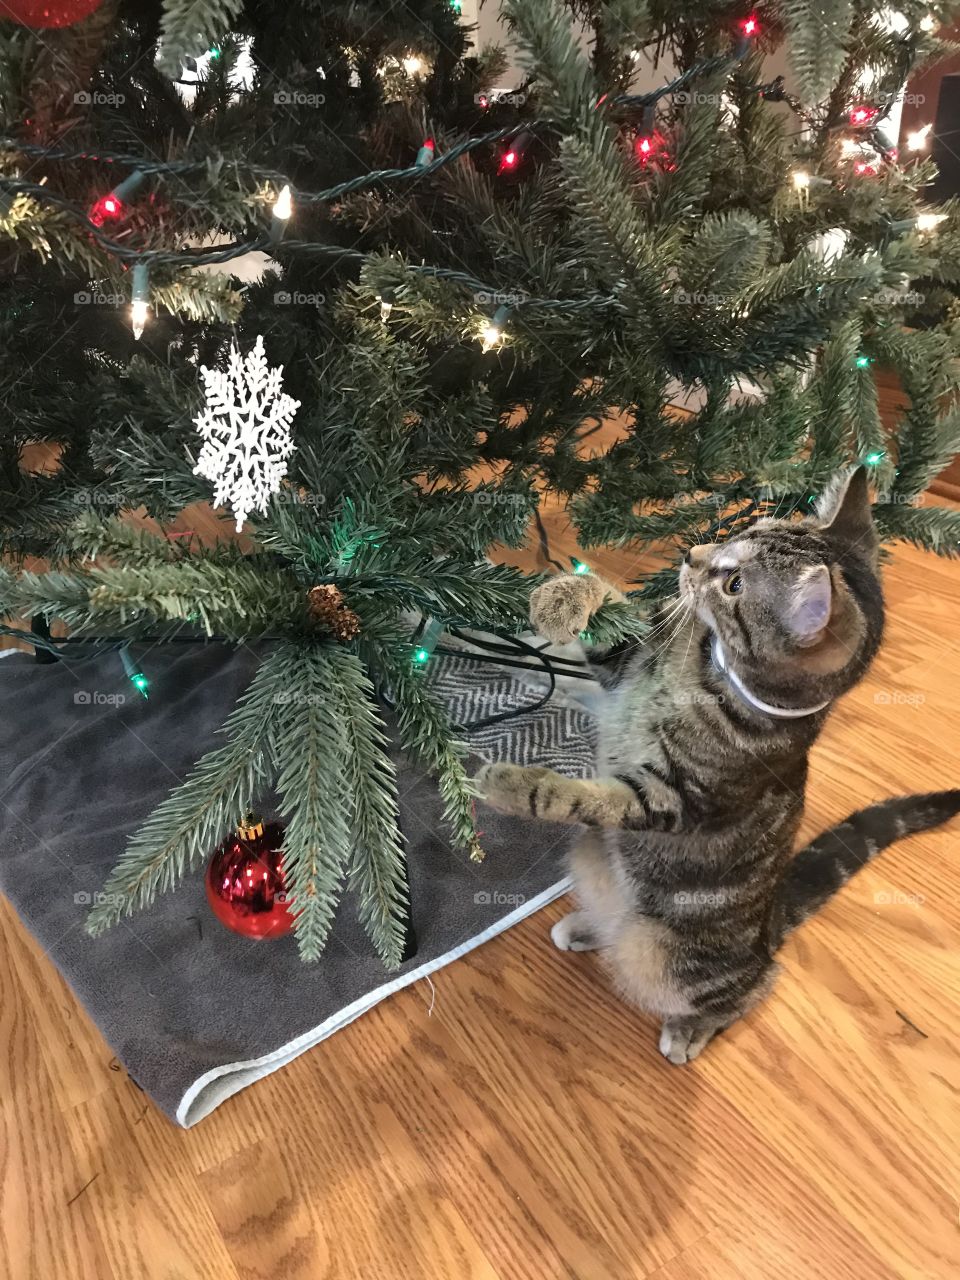 Kitten playing with Christmas tree